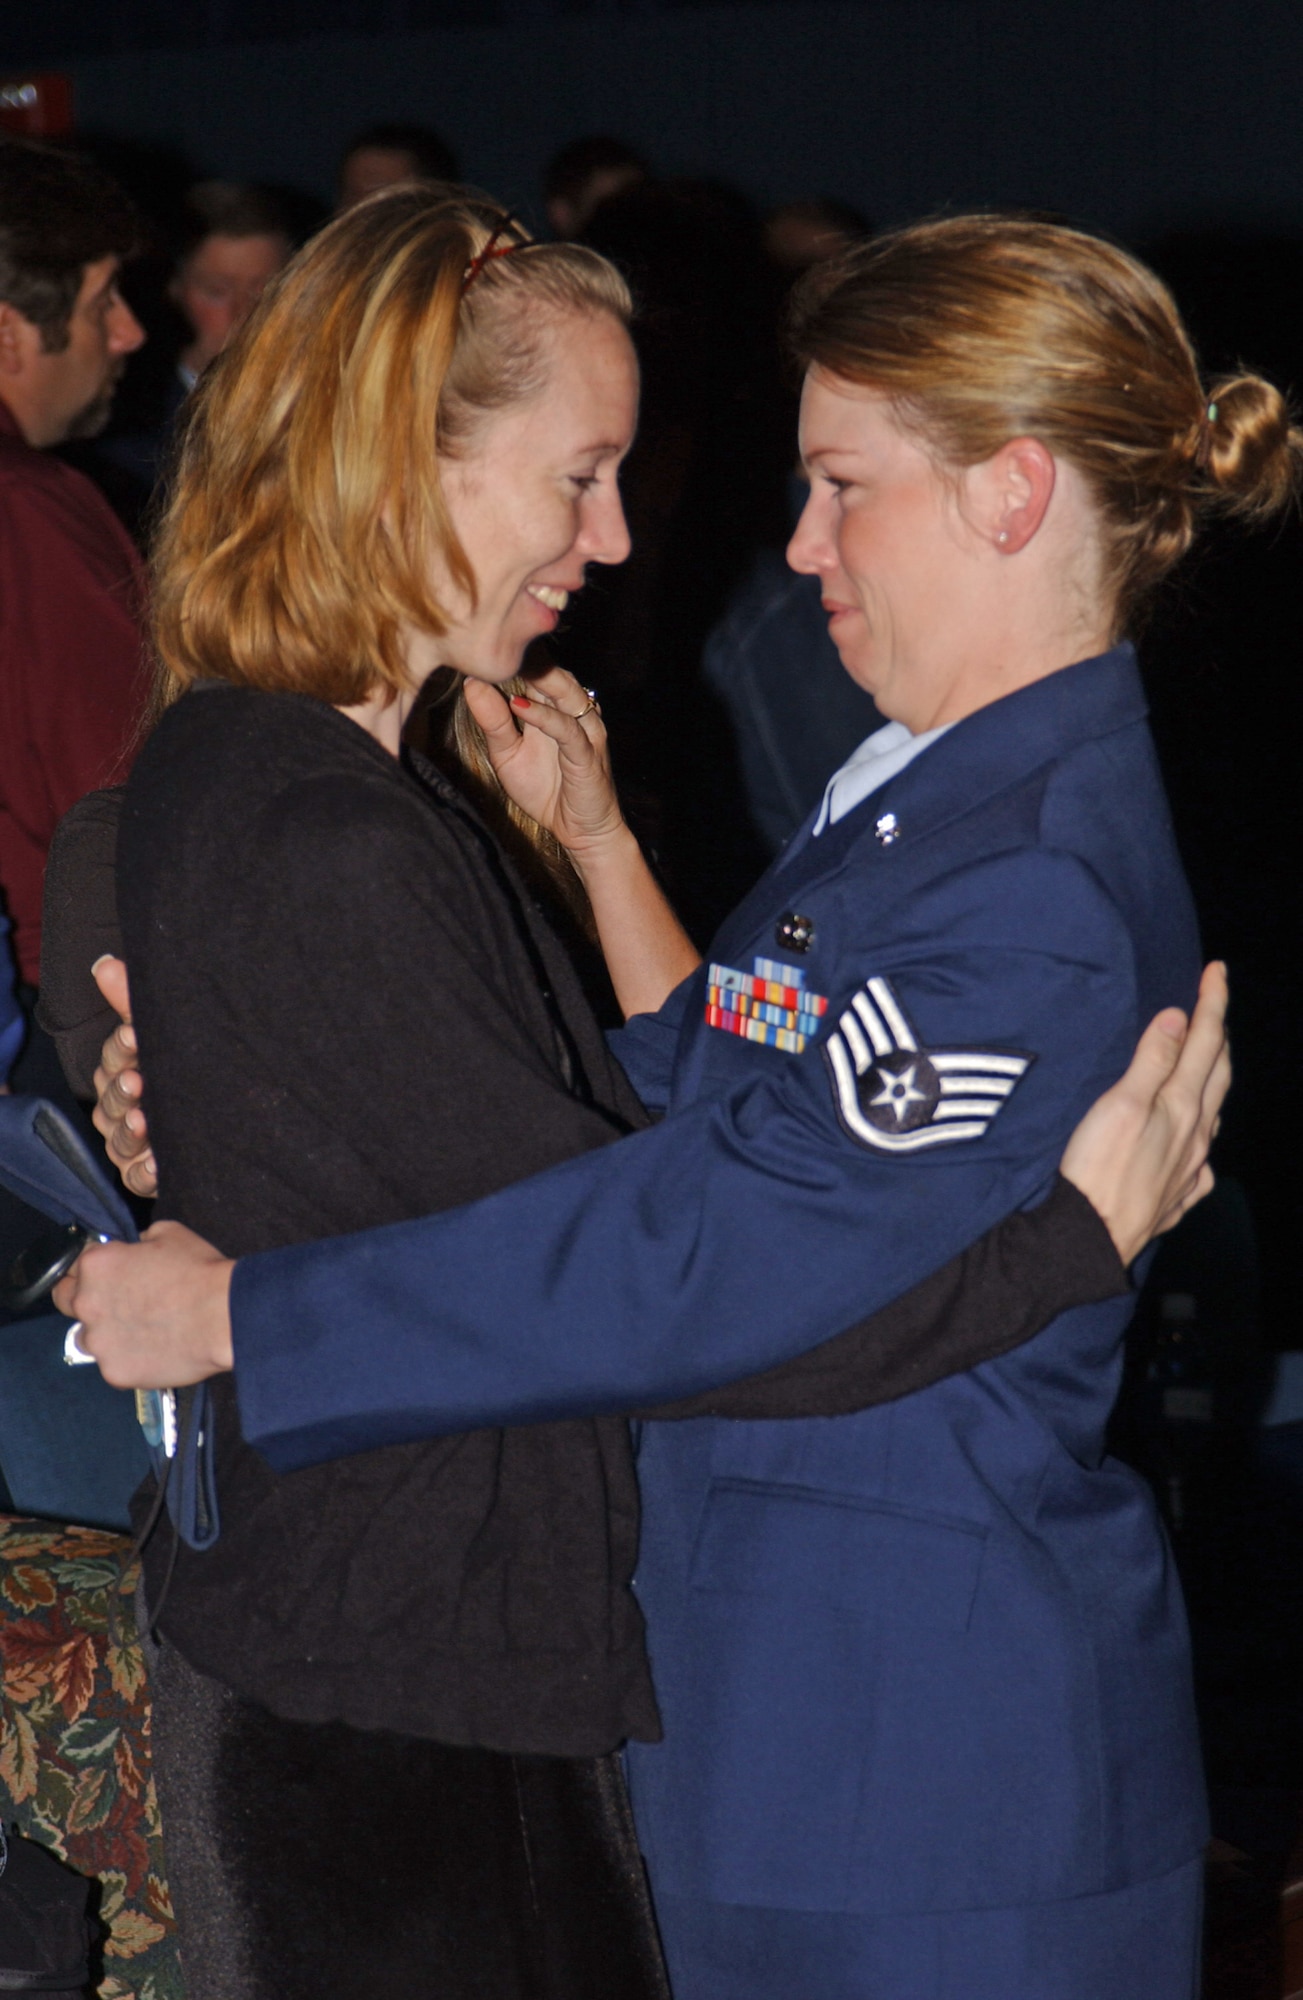 EIELSON AIR FORCE BASE, Alaska--Staff Sgt. Robyn Finch, 354th Maintenance Squadron NCO in charge of information management, consoles Rebecca Clemmons,
wife of Master Sgt. Brad Clemmons, 354th Civil Engineer Squadron explosive ordnance disposal craftsman, at his memorial service here Thursday.  Sergeant Clemmons lost his life Aug. 21 in support of Operation Iraqi Freedom while traveling in a convoy en route to Taji, Iraq, when his vehicle was struck by an improvised explosive device.  (U.S. Air Force photo by Airman Christopher Griffin)